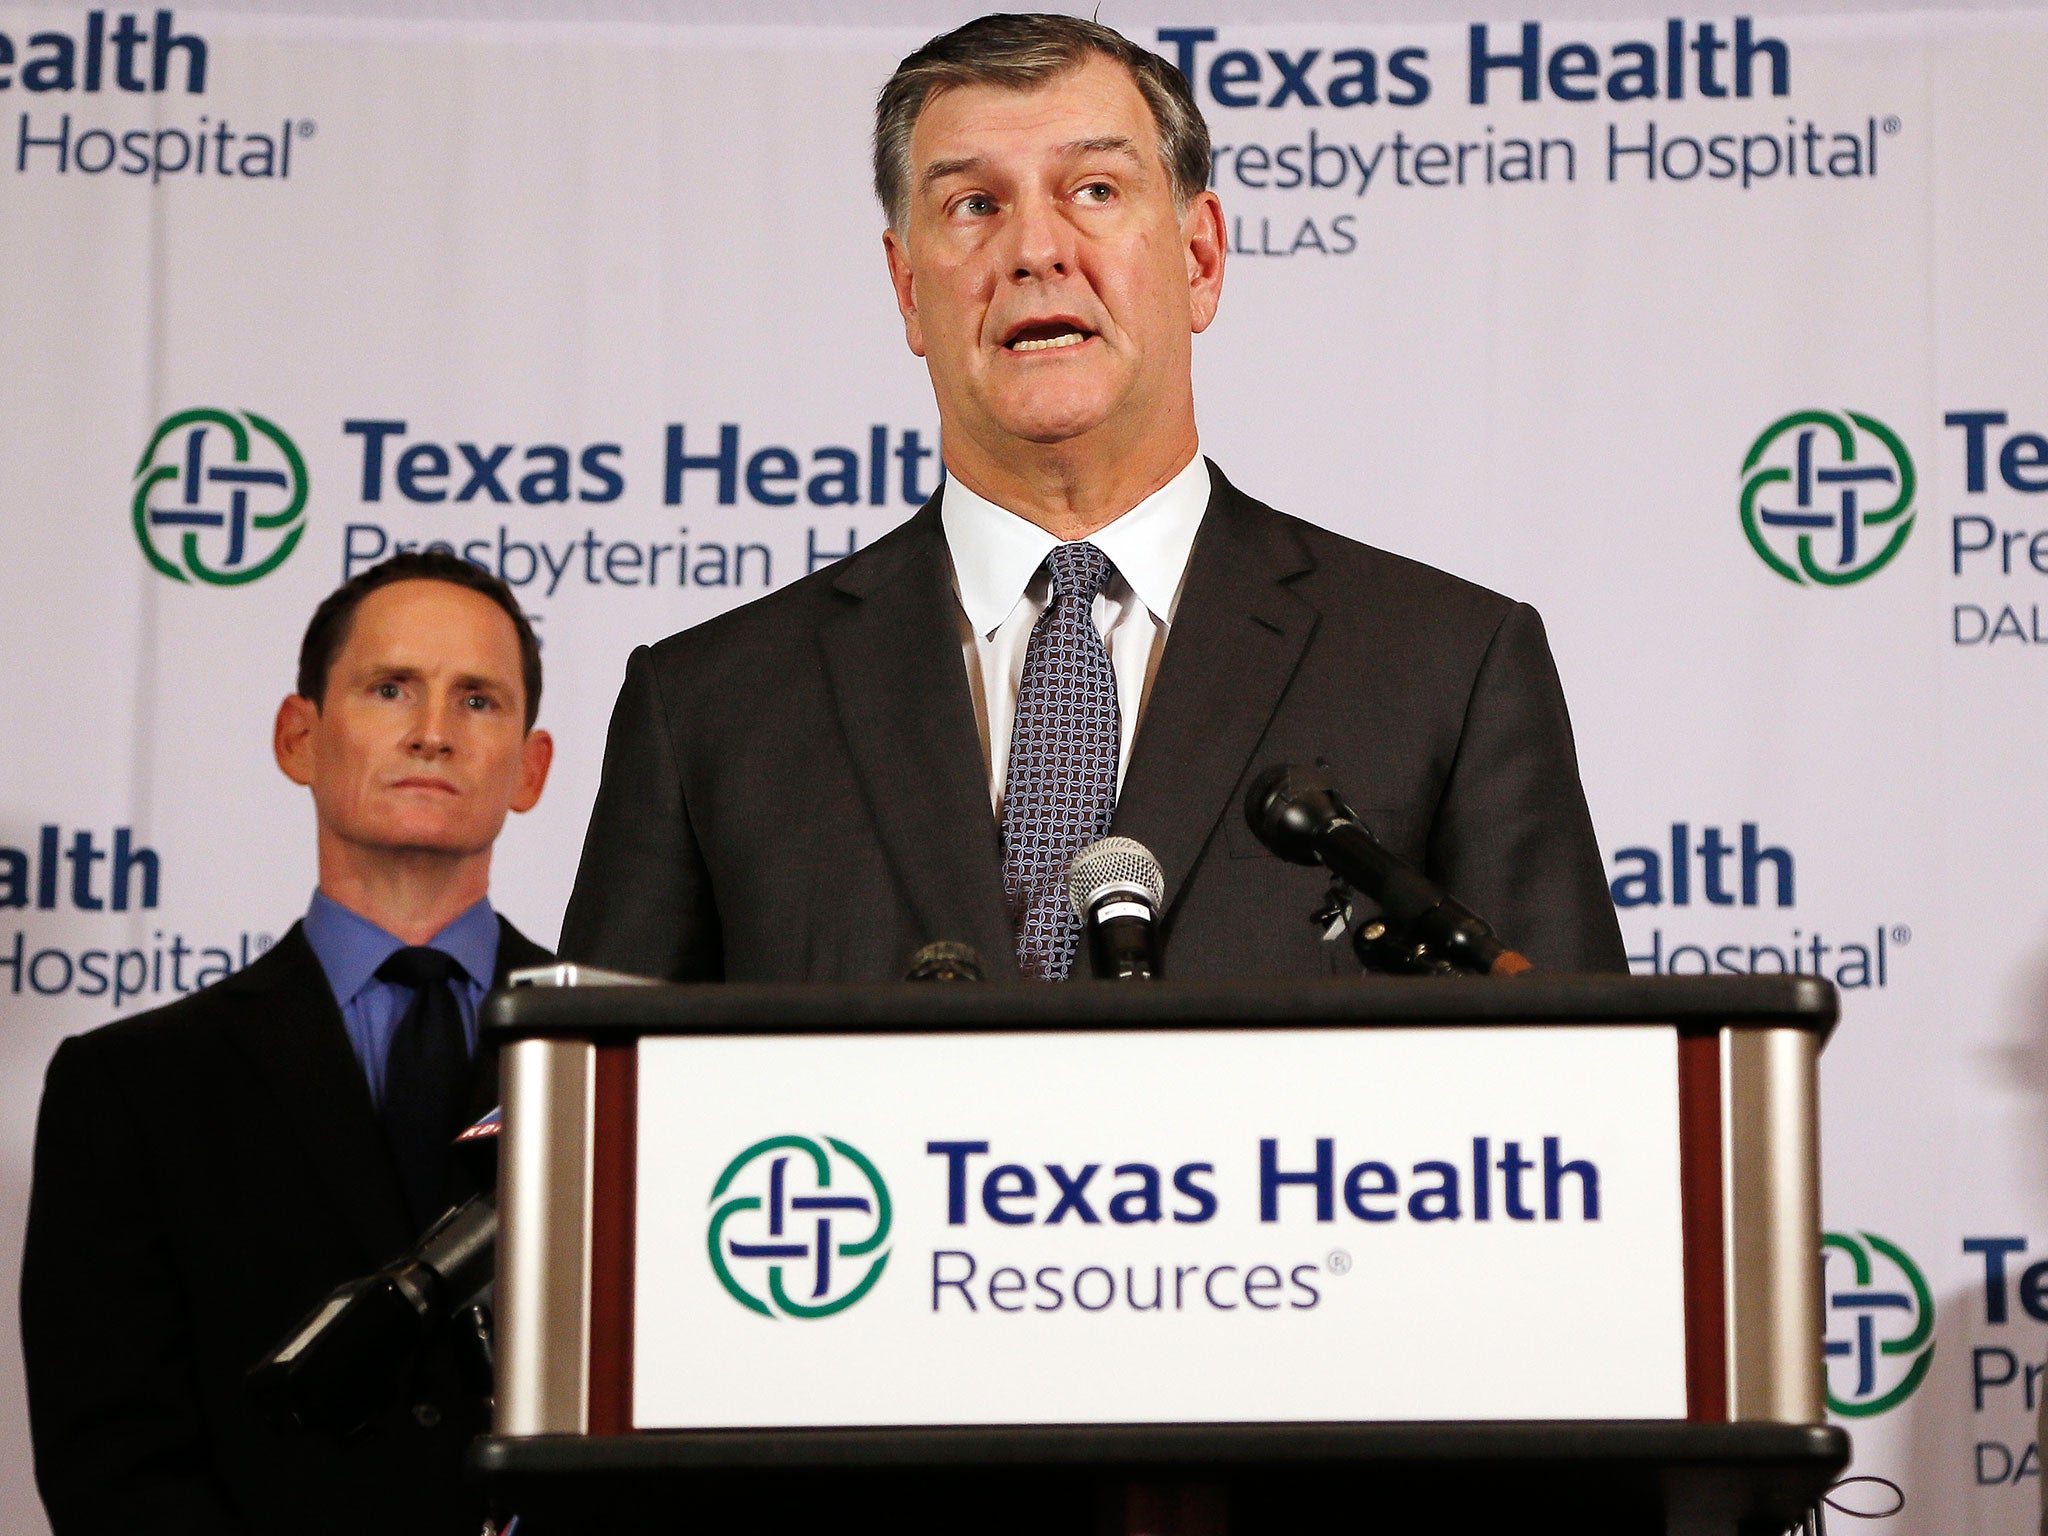 The Dallas Mayor Mike Rawlings speaks about the healthcare worker who has Ebola